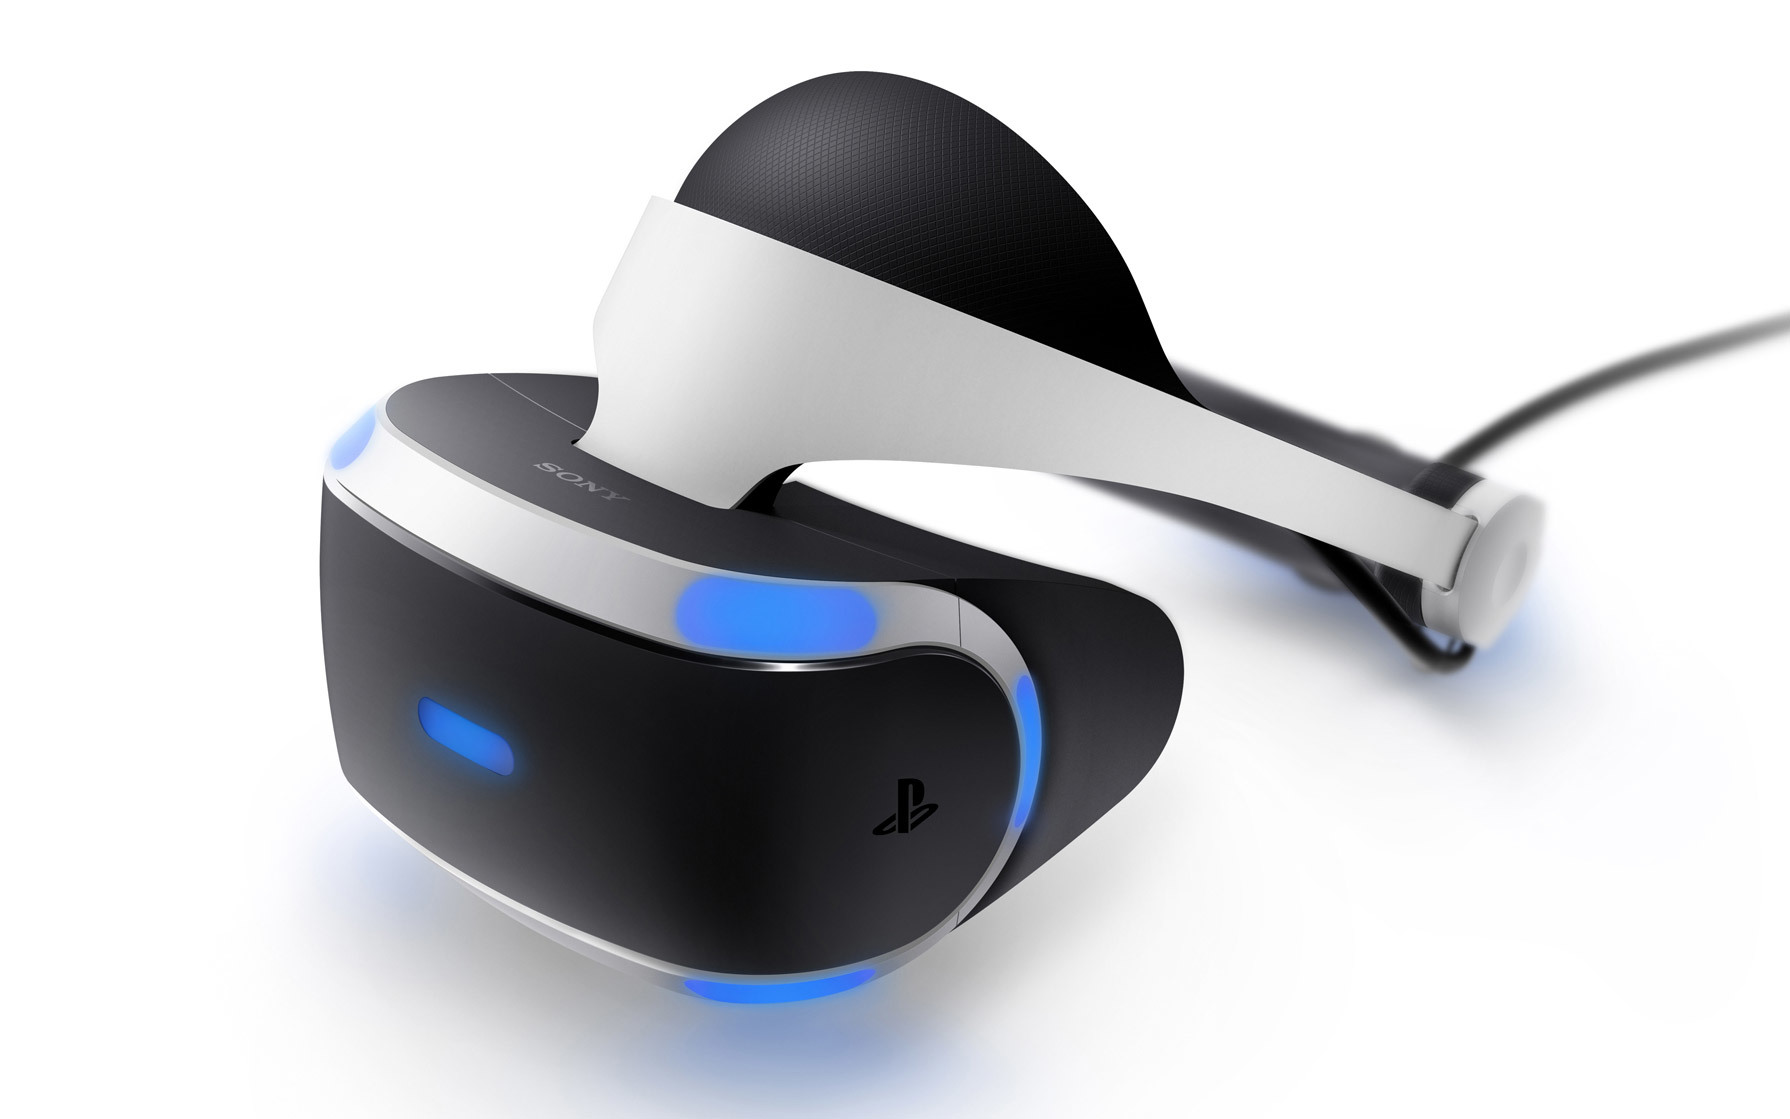 Playstation father finds VR headsets 'simply annoying'